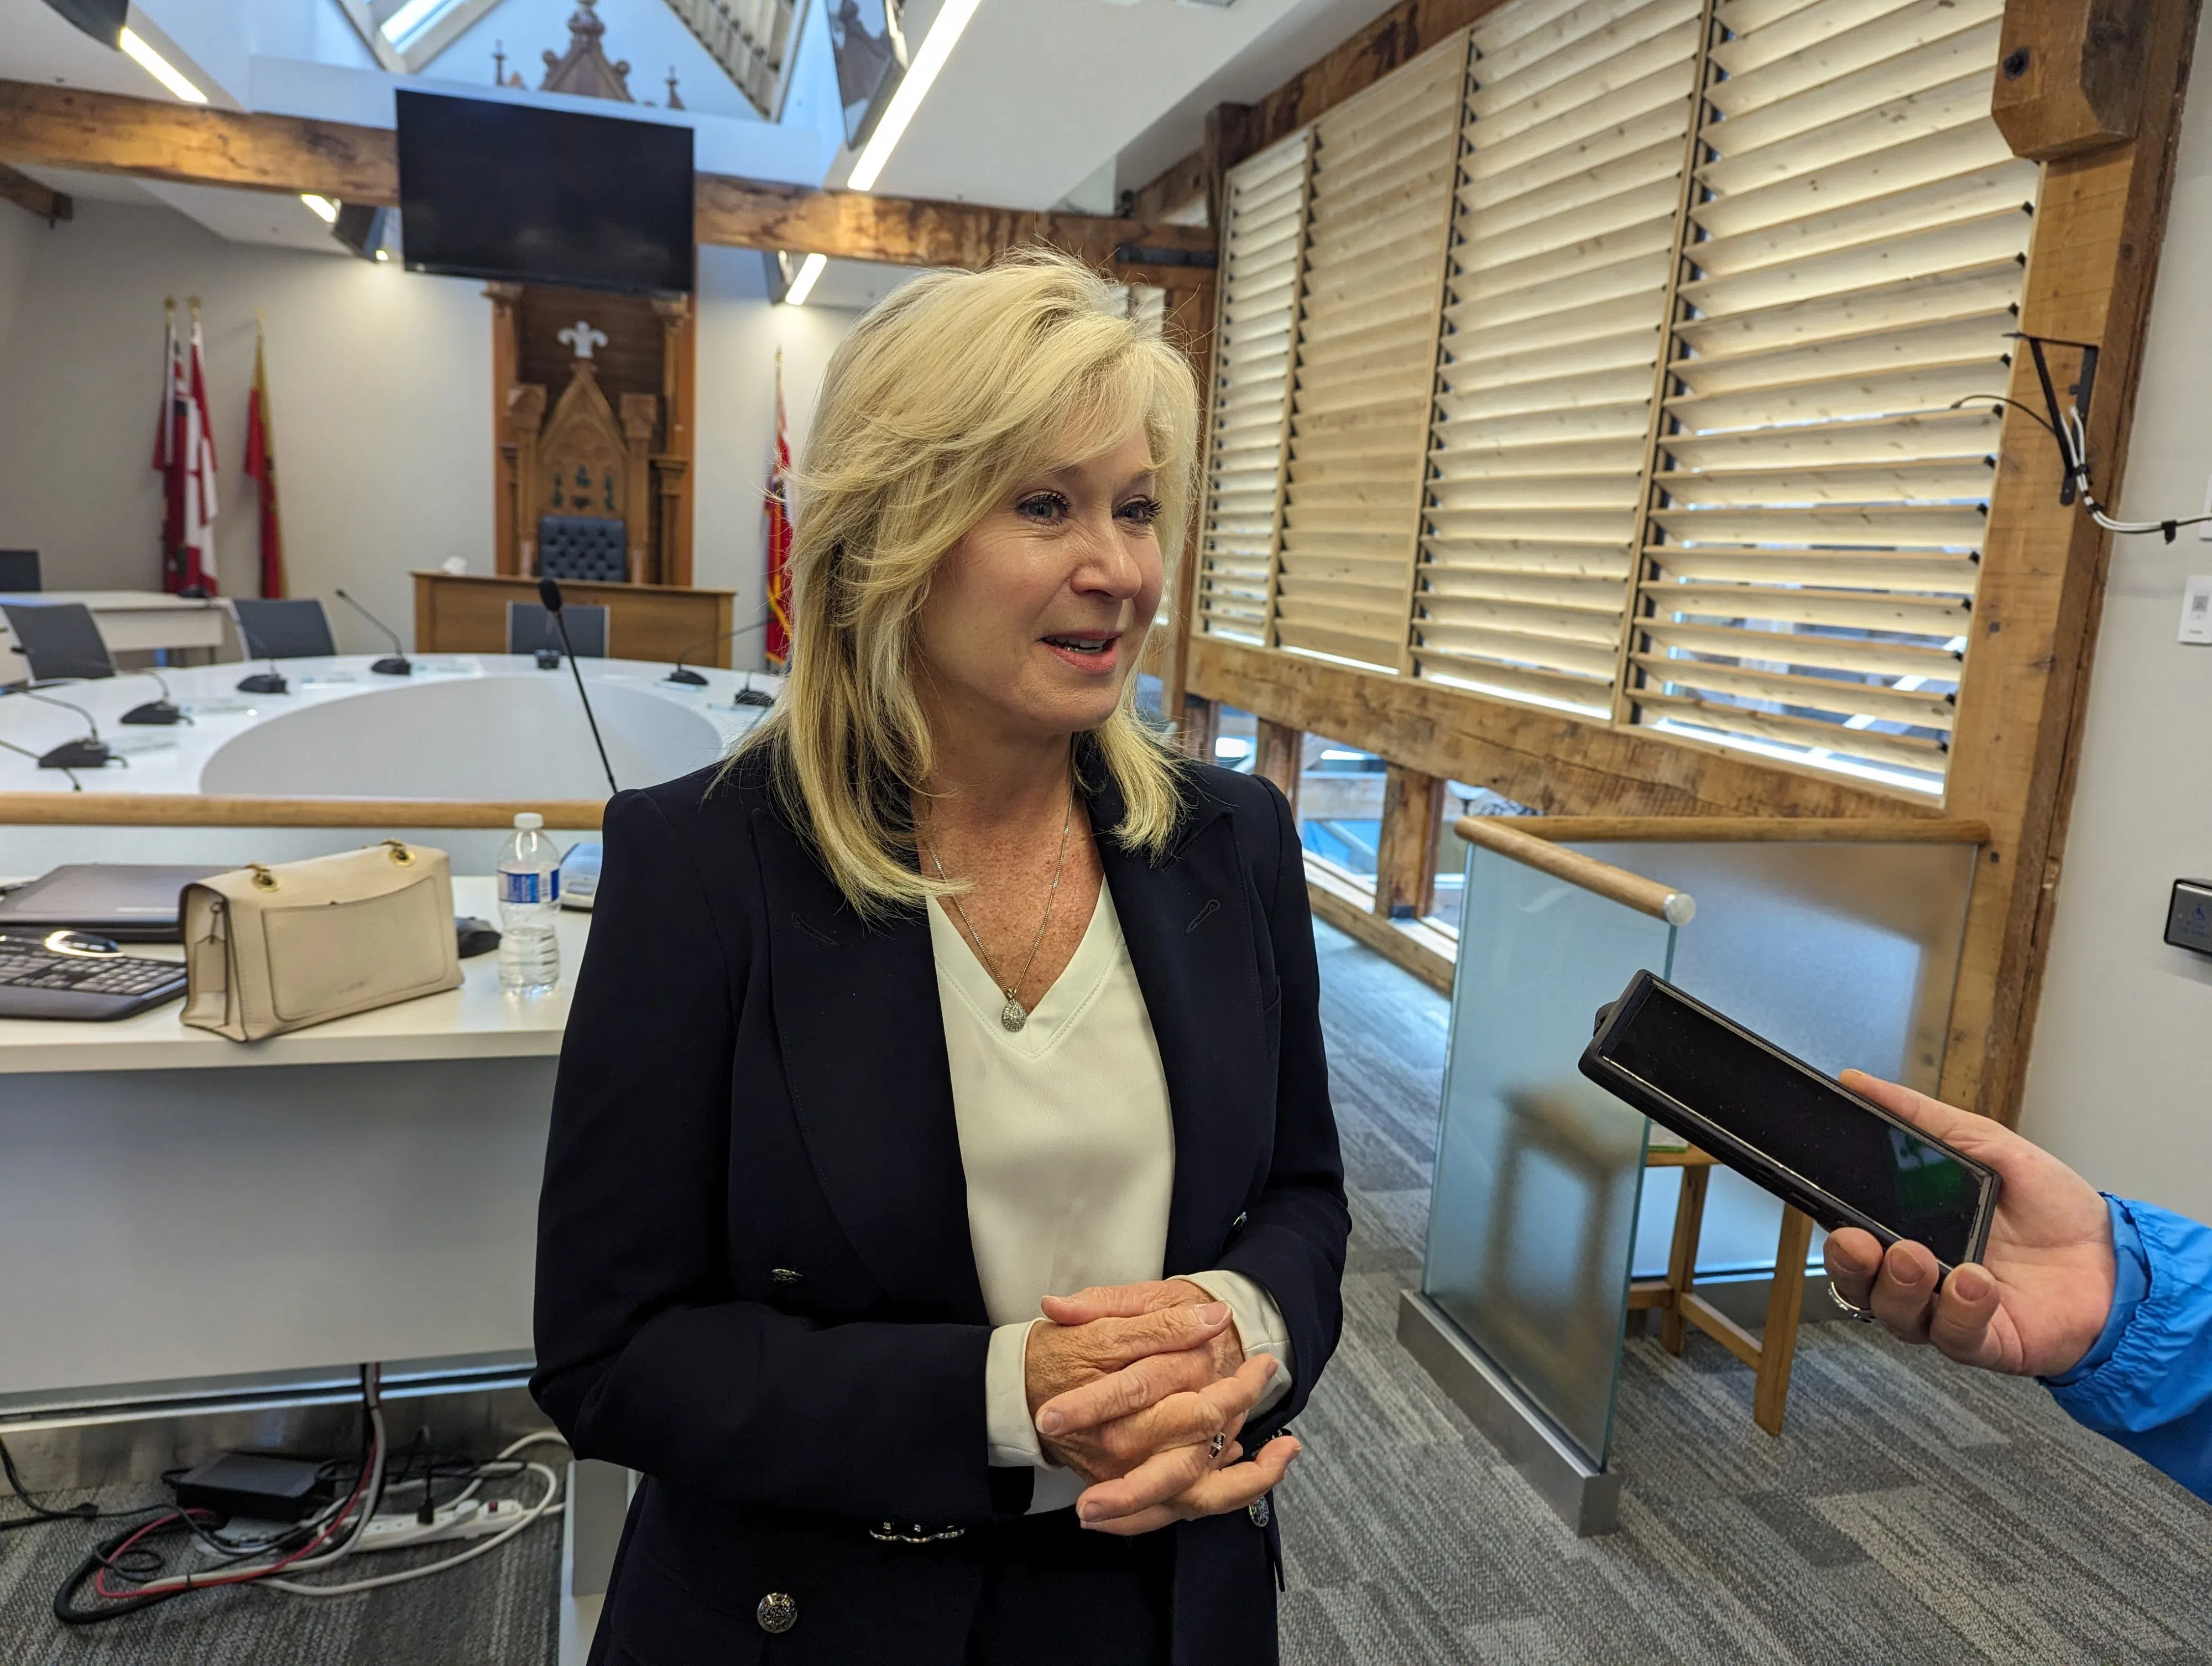 Ontario Liberal Leader Bonnie Crombie visits Belleville to discuss homelessness & opioid crisis